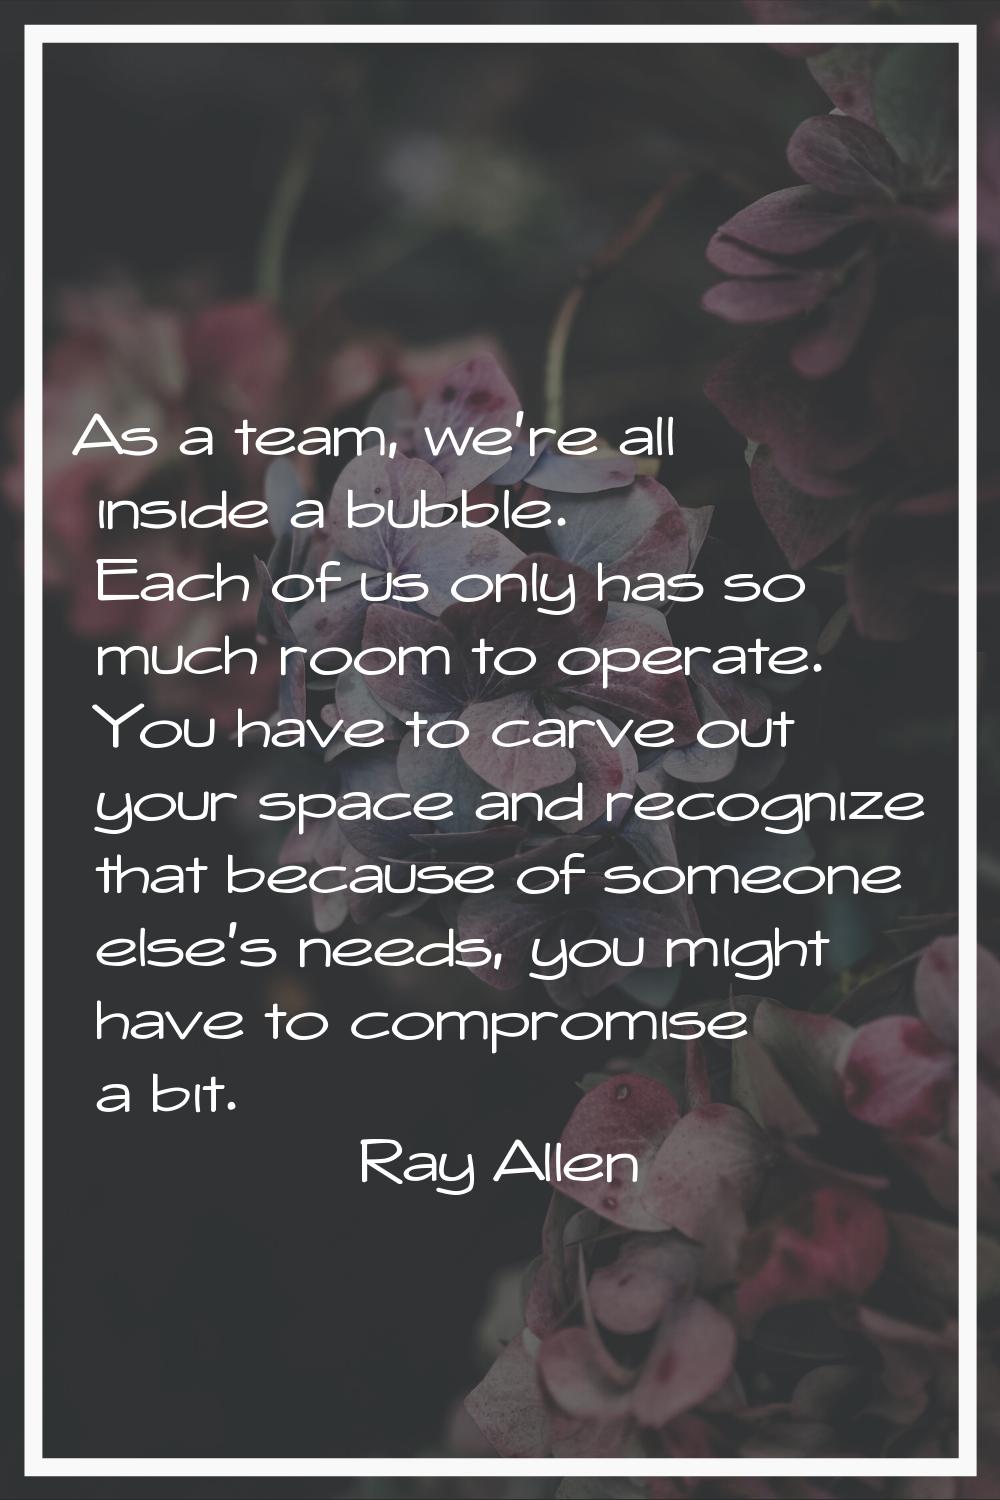 As a team, we're all inside a bubble. Each of us only has so much room to operate. You have to carv